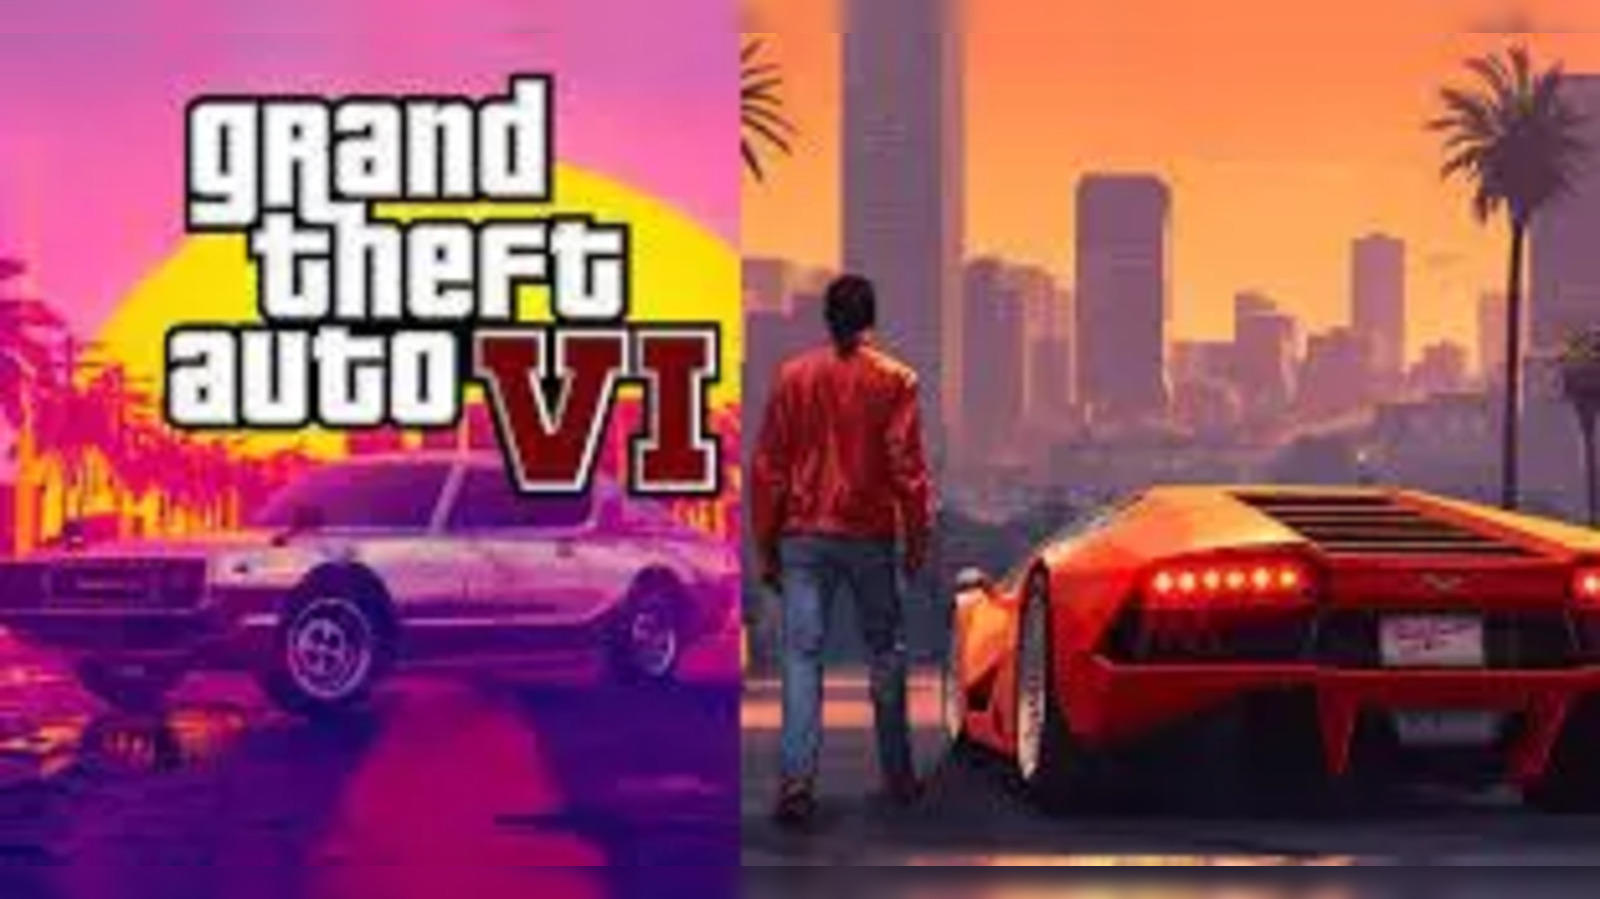 GTA 6 trailer adverts are taking over  but they're not